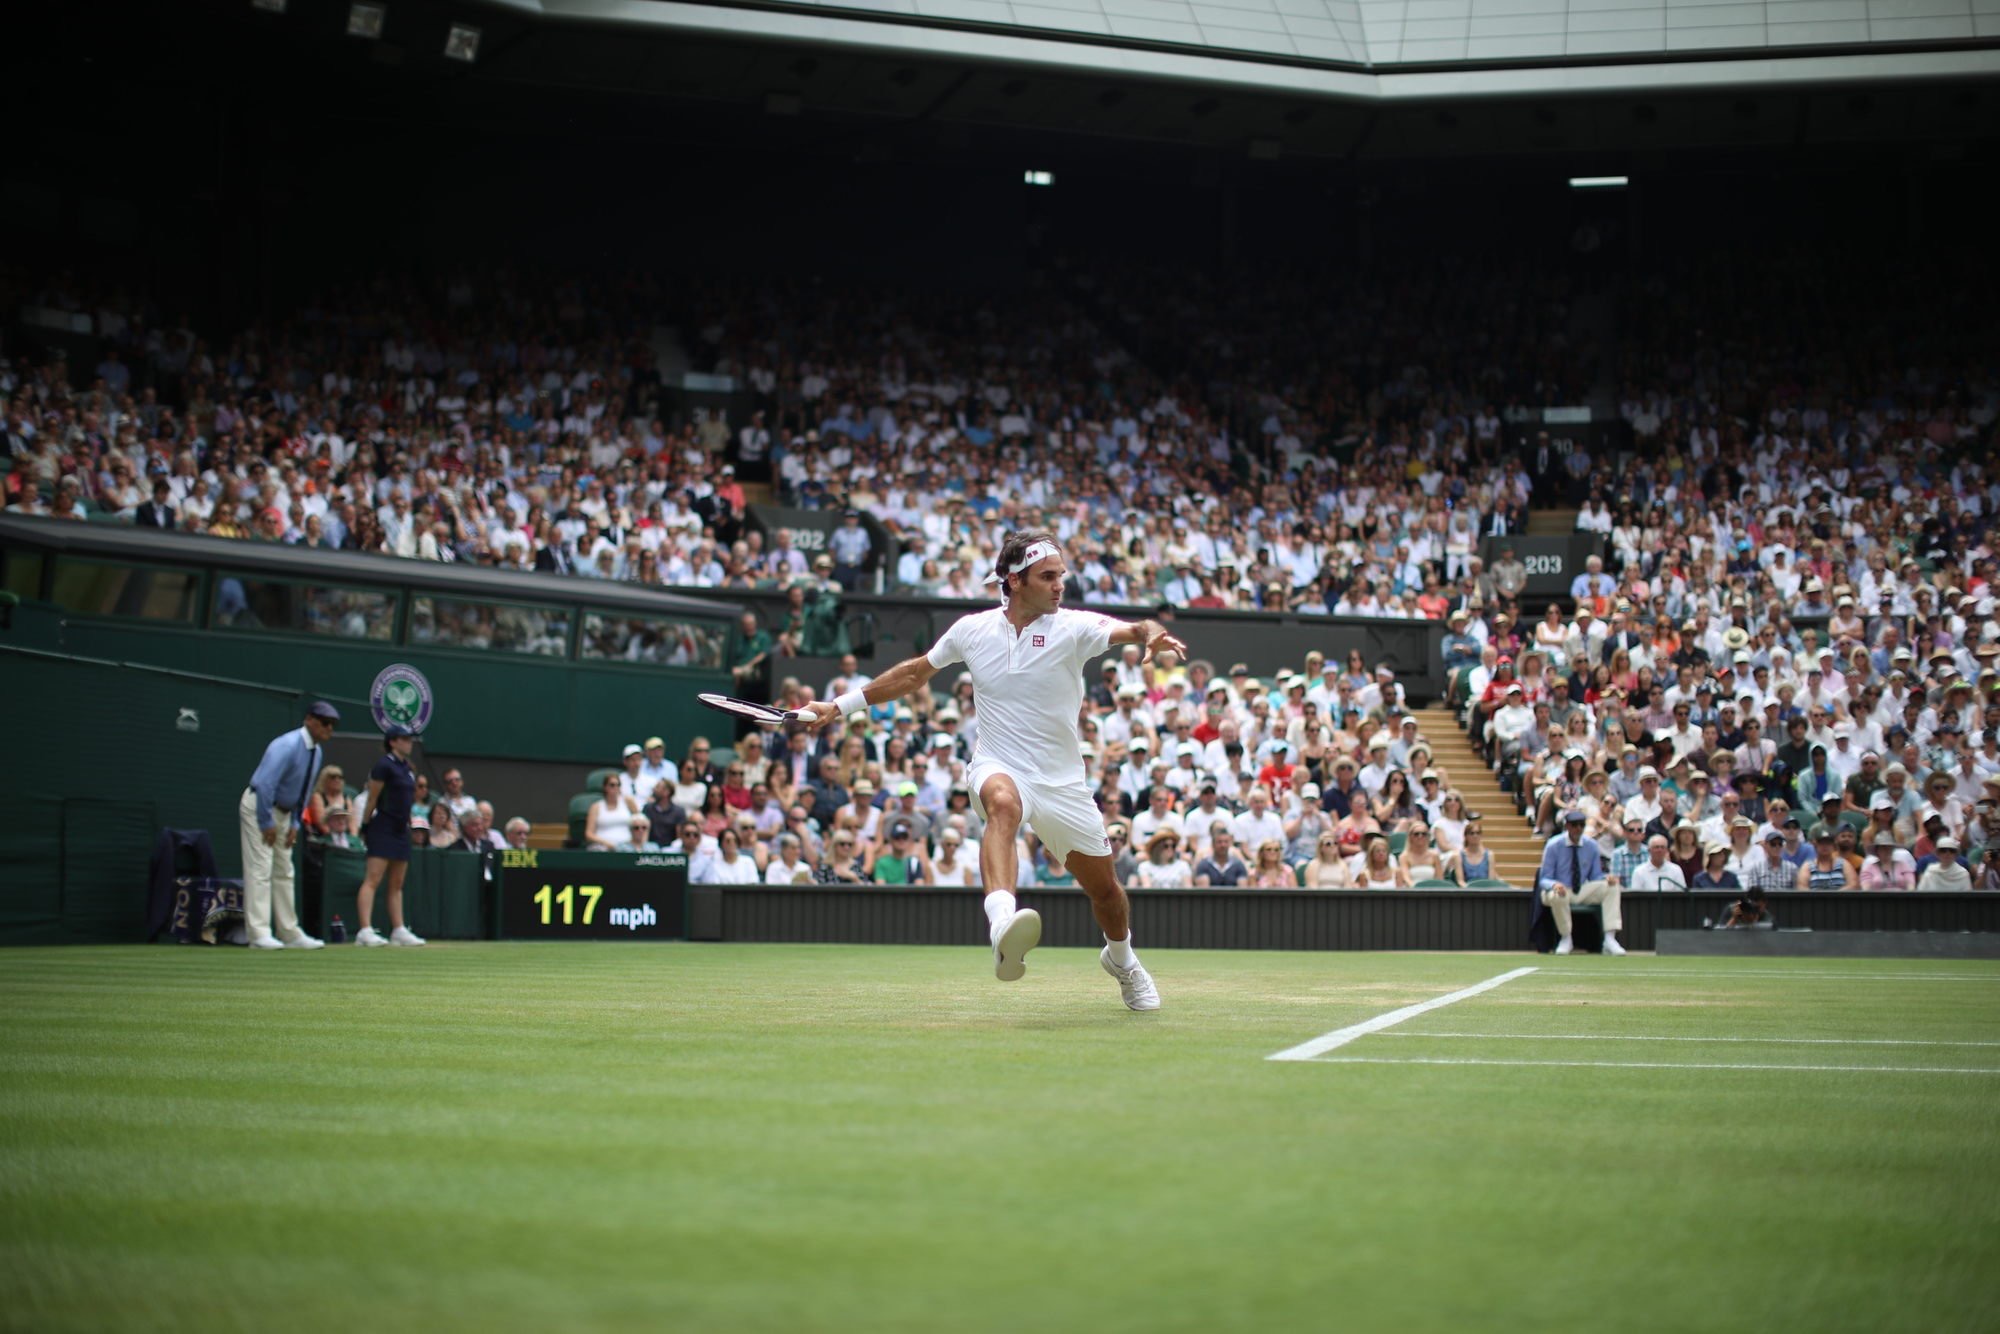 Federer Defeats Mannarino in Straight Sets